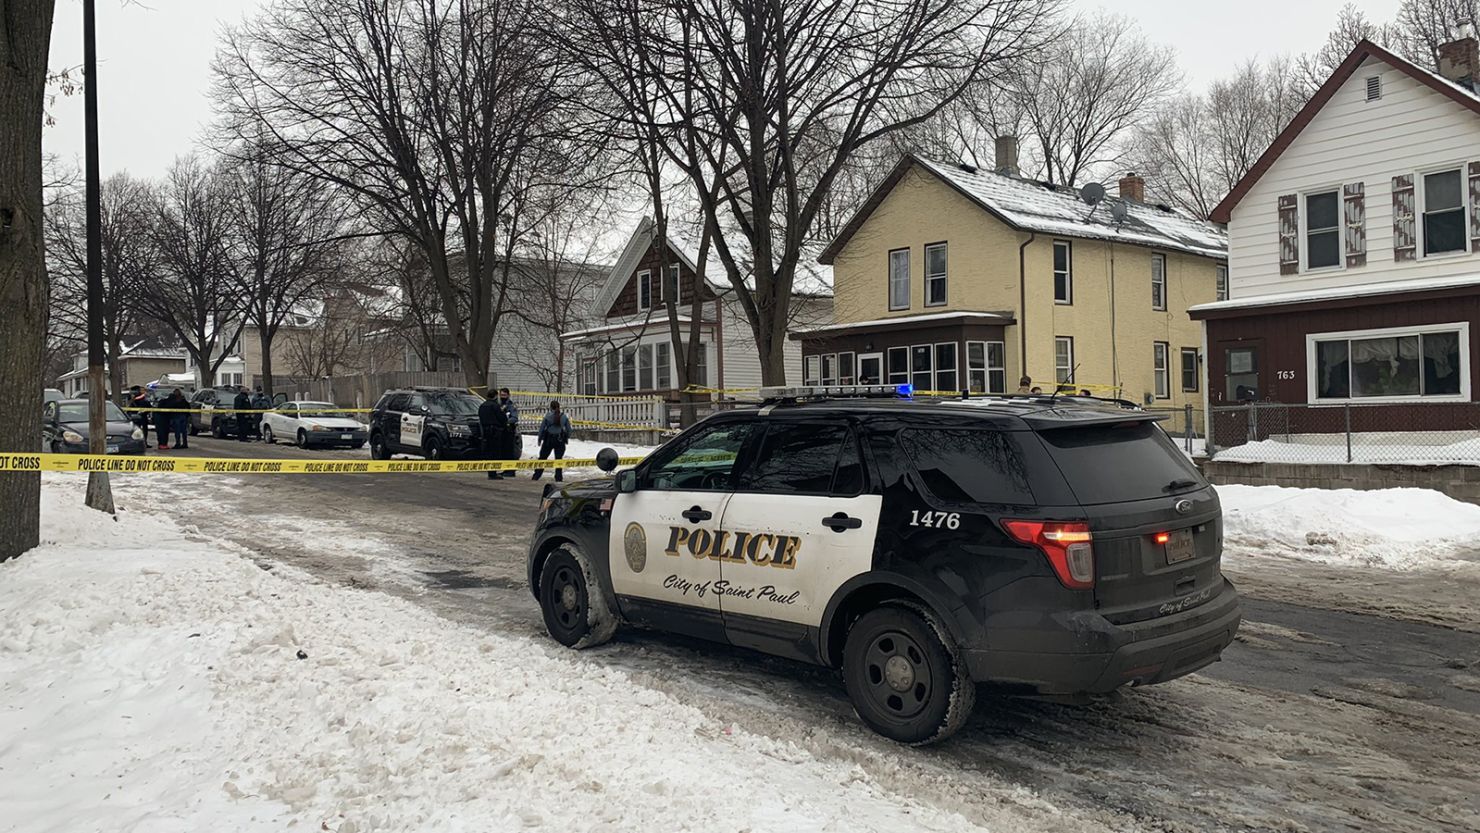 Officers and investigators at the scene of a shooting in St. Paul, Minnesota.